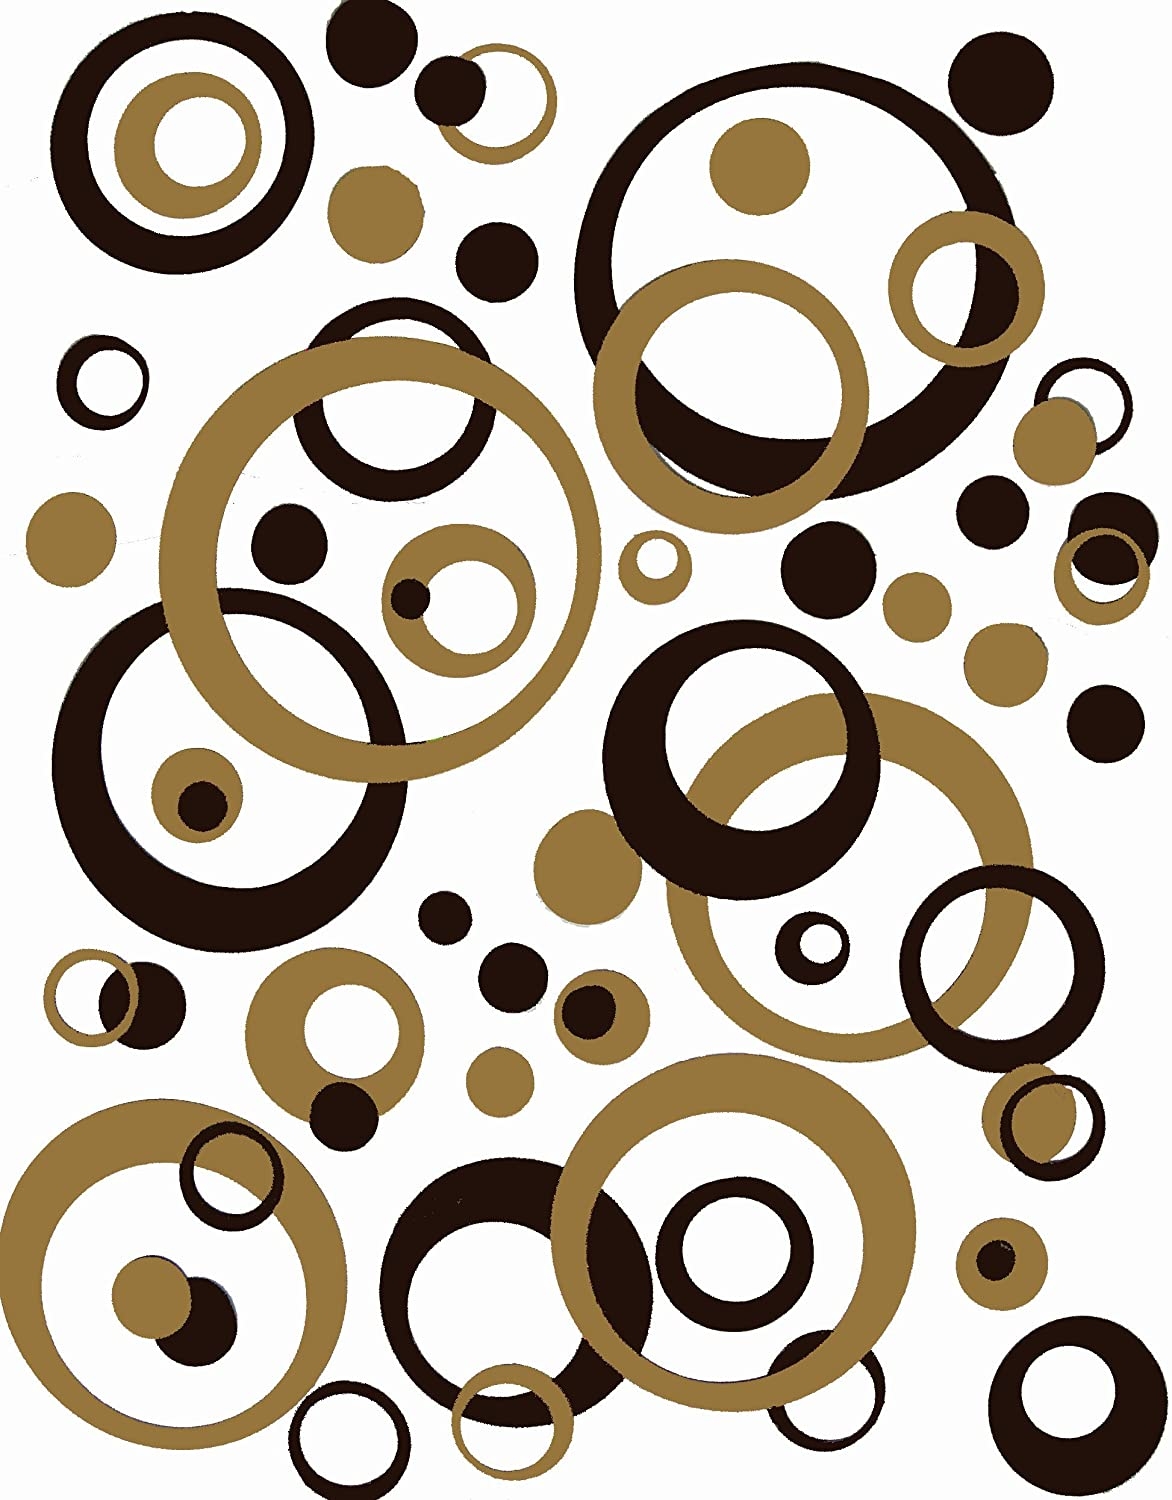 Wall Decor Plus More WDPM222 Wall Vinyl Sticker Decal Circles and  Rings, Tan/Chocolate Brown, 50-Piece